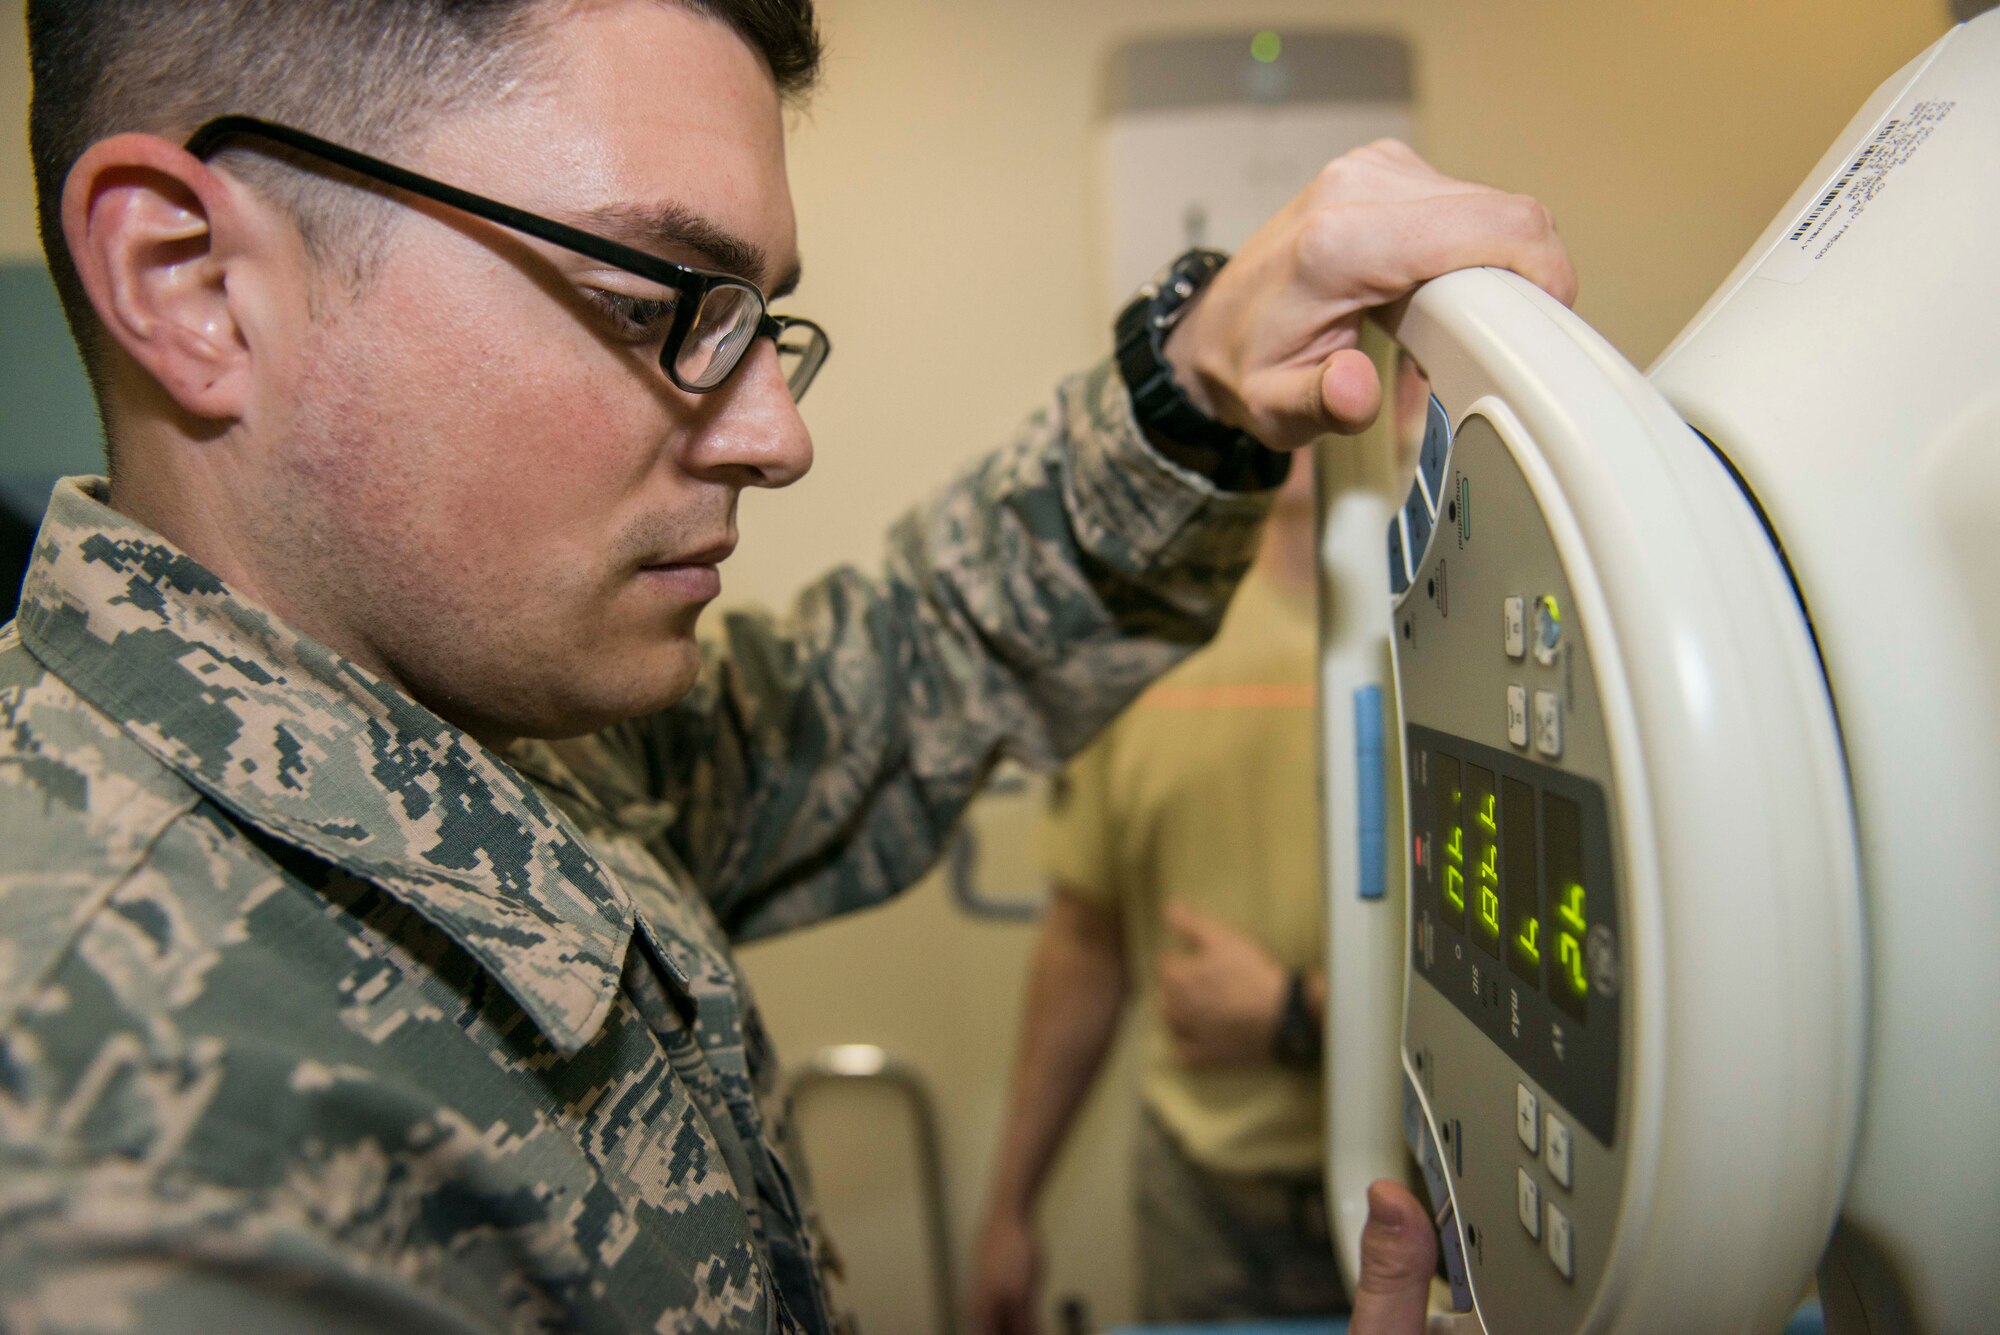 U.S. Air Force Airman 1st Class Jason Grosso, a diagnostic imaging technologist with the 35th Surgical Operations Squadron, captures a “Y-view” image of a patient’s shoulder using a semi-digital x-ray machine that turns radiation into light at Misawa Air Base, Japan, Jan. 27, 2016. The Y-view is a lateral standard x-ray of the shoulder joint and is typically used to diagnose and treat dislocations. This x-ray machine is a safer version of its predecessors, reducing the amount of radiation needed to produce a diagnostic image. Grosso hails from Bridgman, Michigan. (U.S. Air Force photo by Staff Sgt. Benjamin W. Stratton)